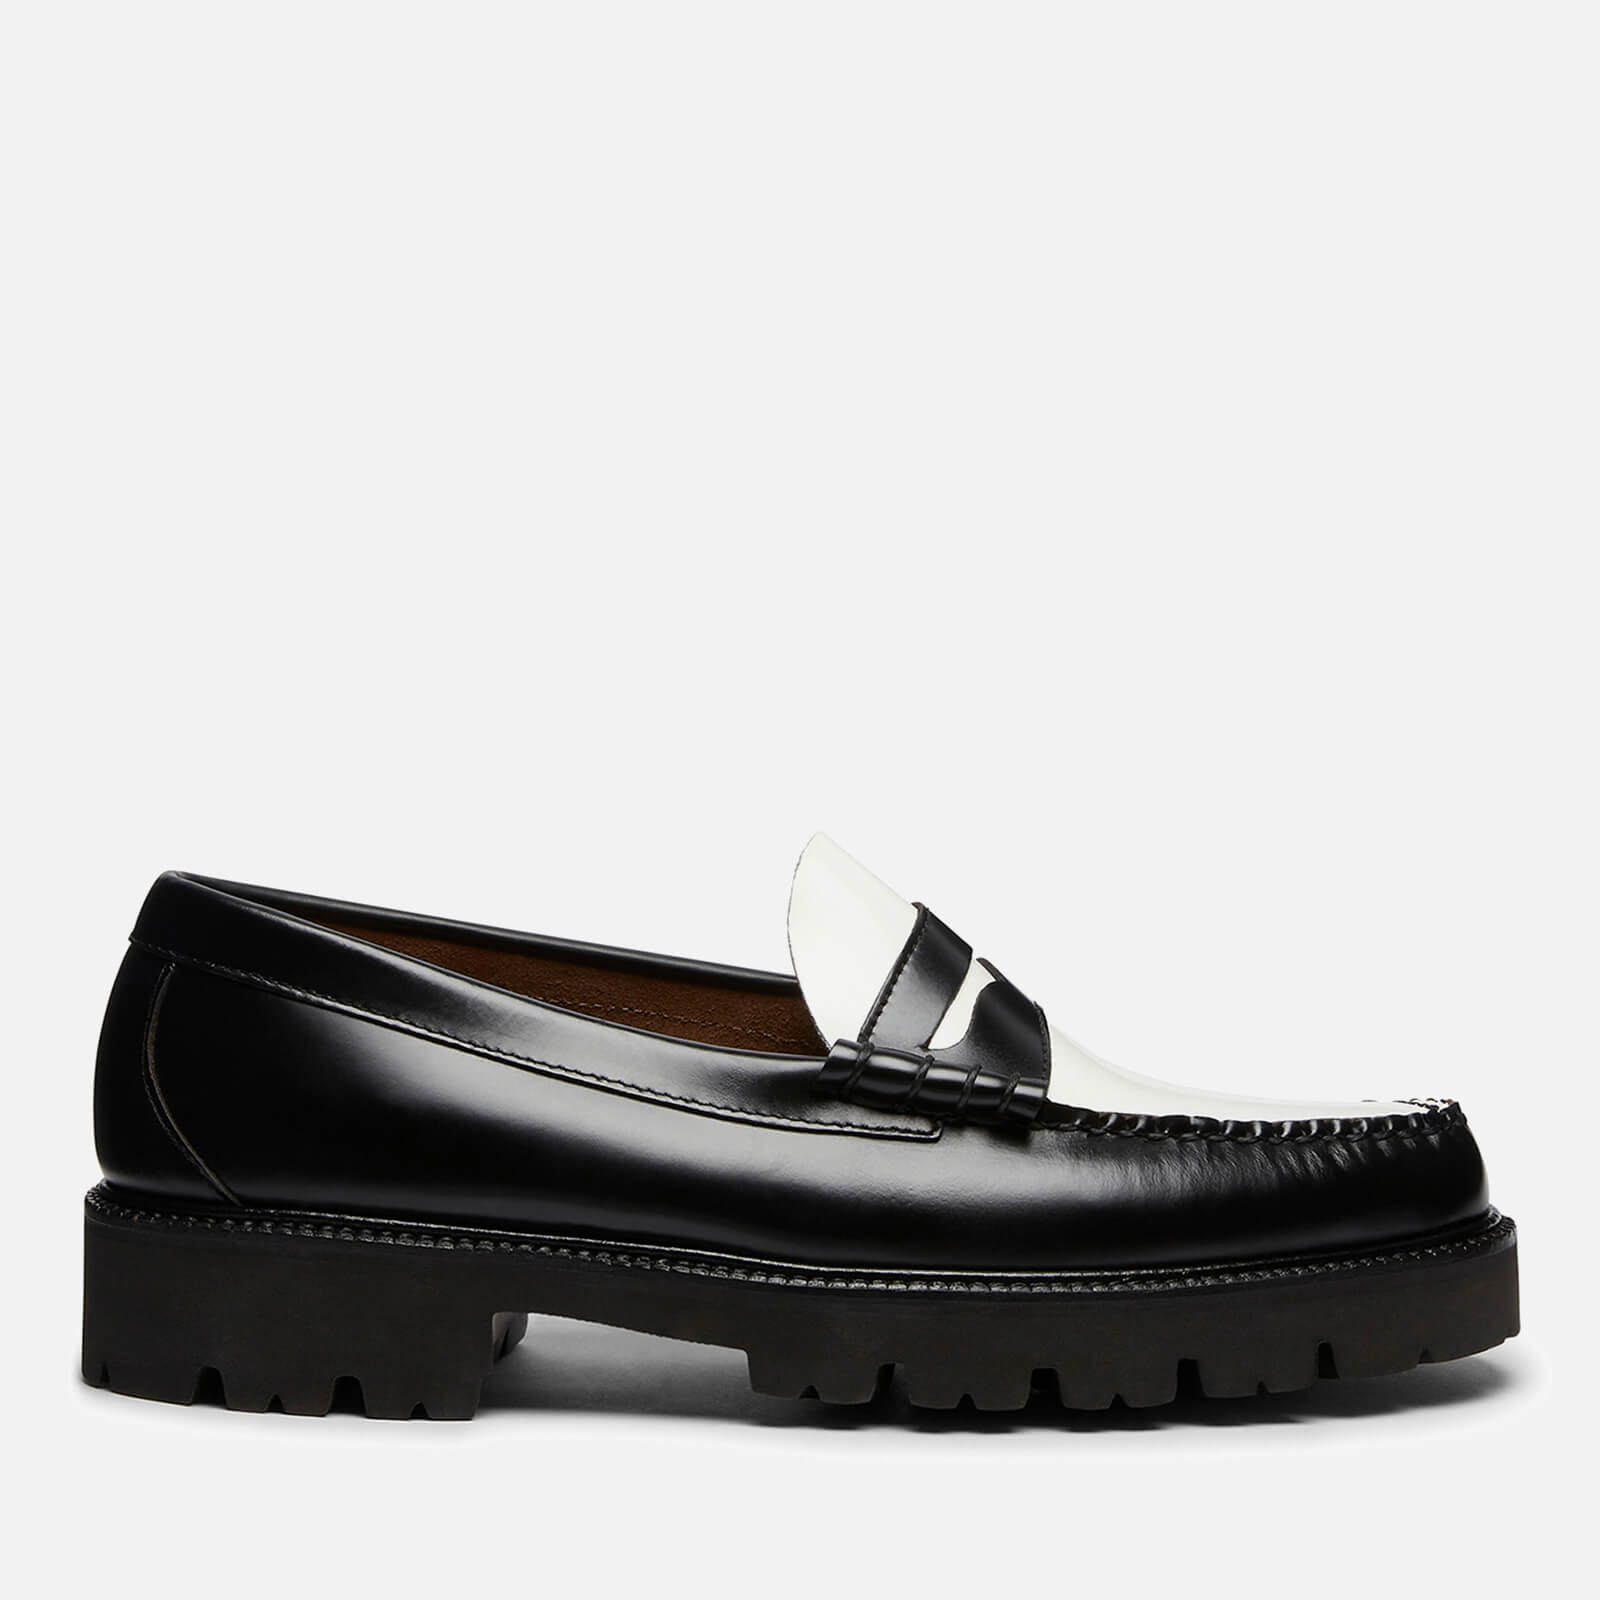 G.H Bass Men’s 90 Larson Leather Penny Loafers